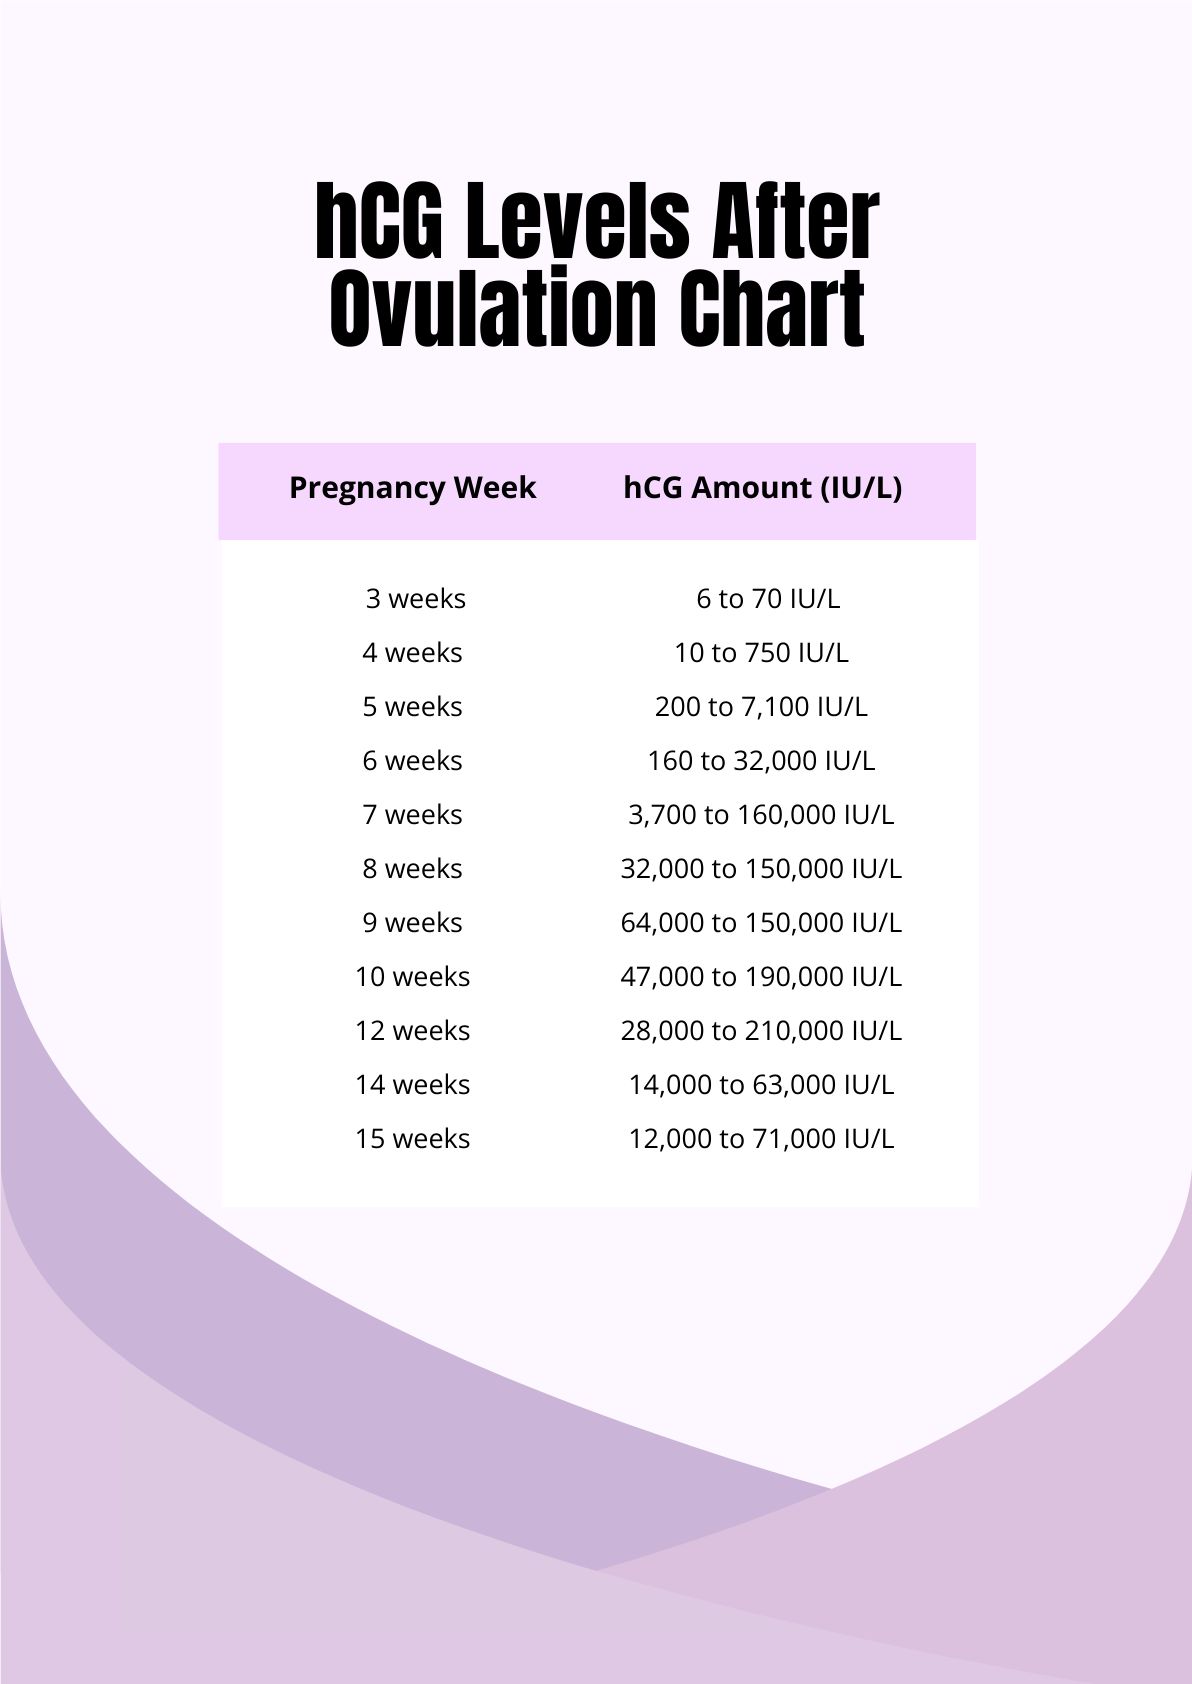 HCG Levels After Ovulation Chart